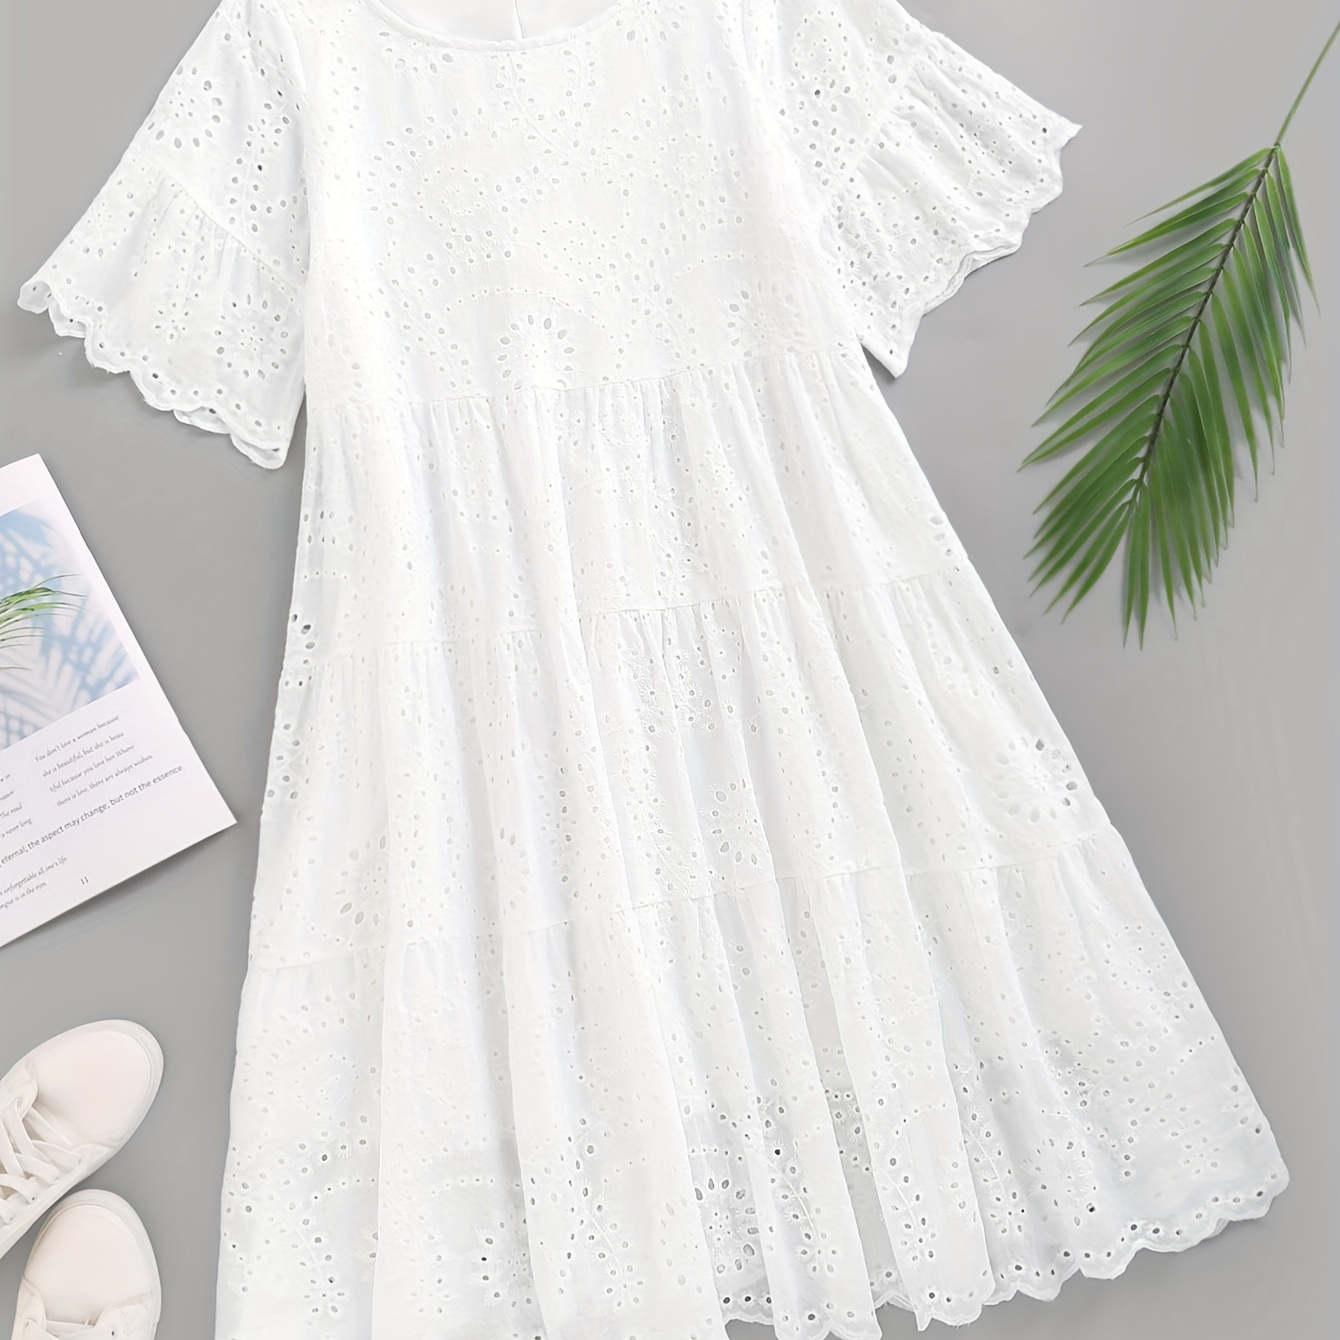 

Eyelet Embroidered Tiered Dress, Vacation Flared Short Sleeve Scallop Trim Crew Neck Dress, Women's Clothing